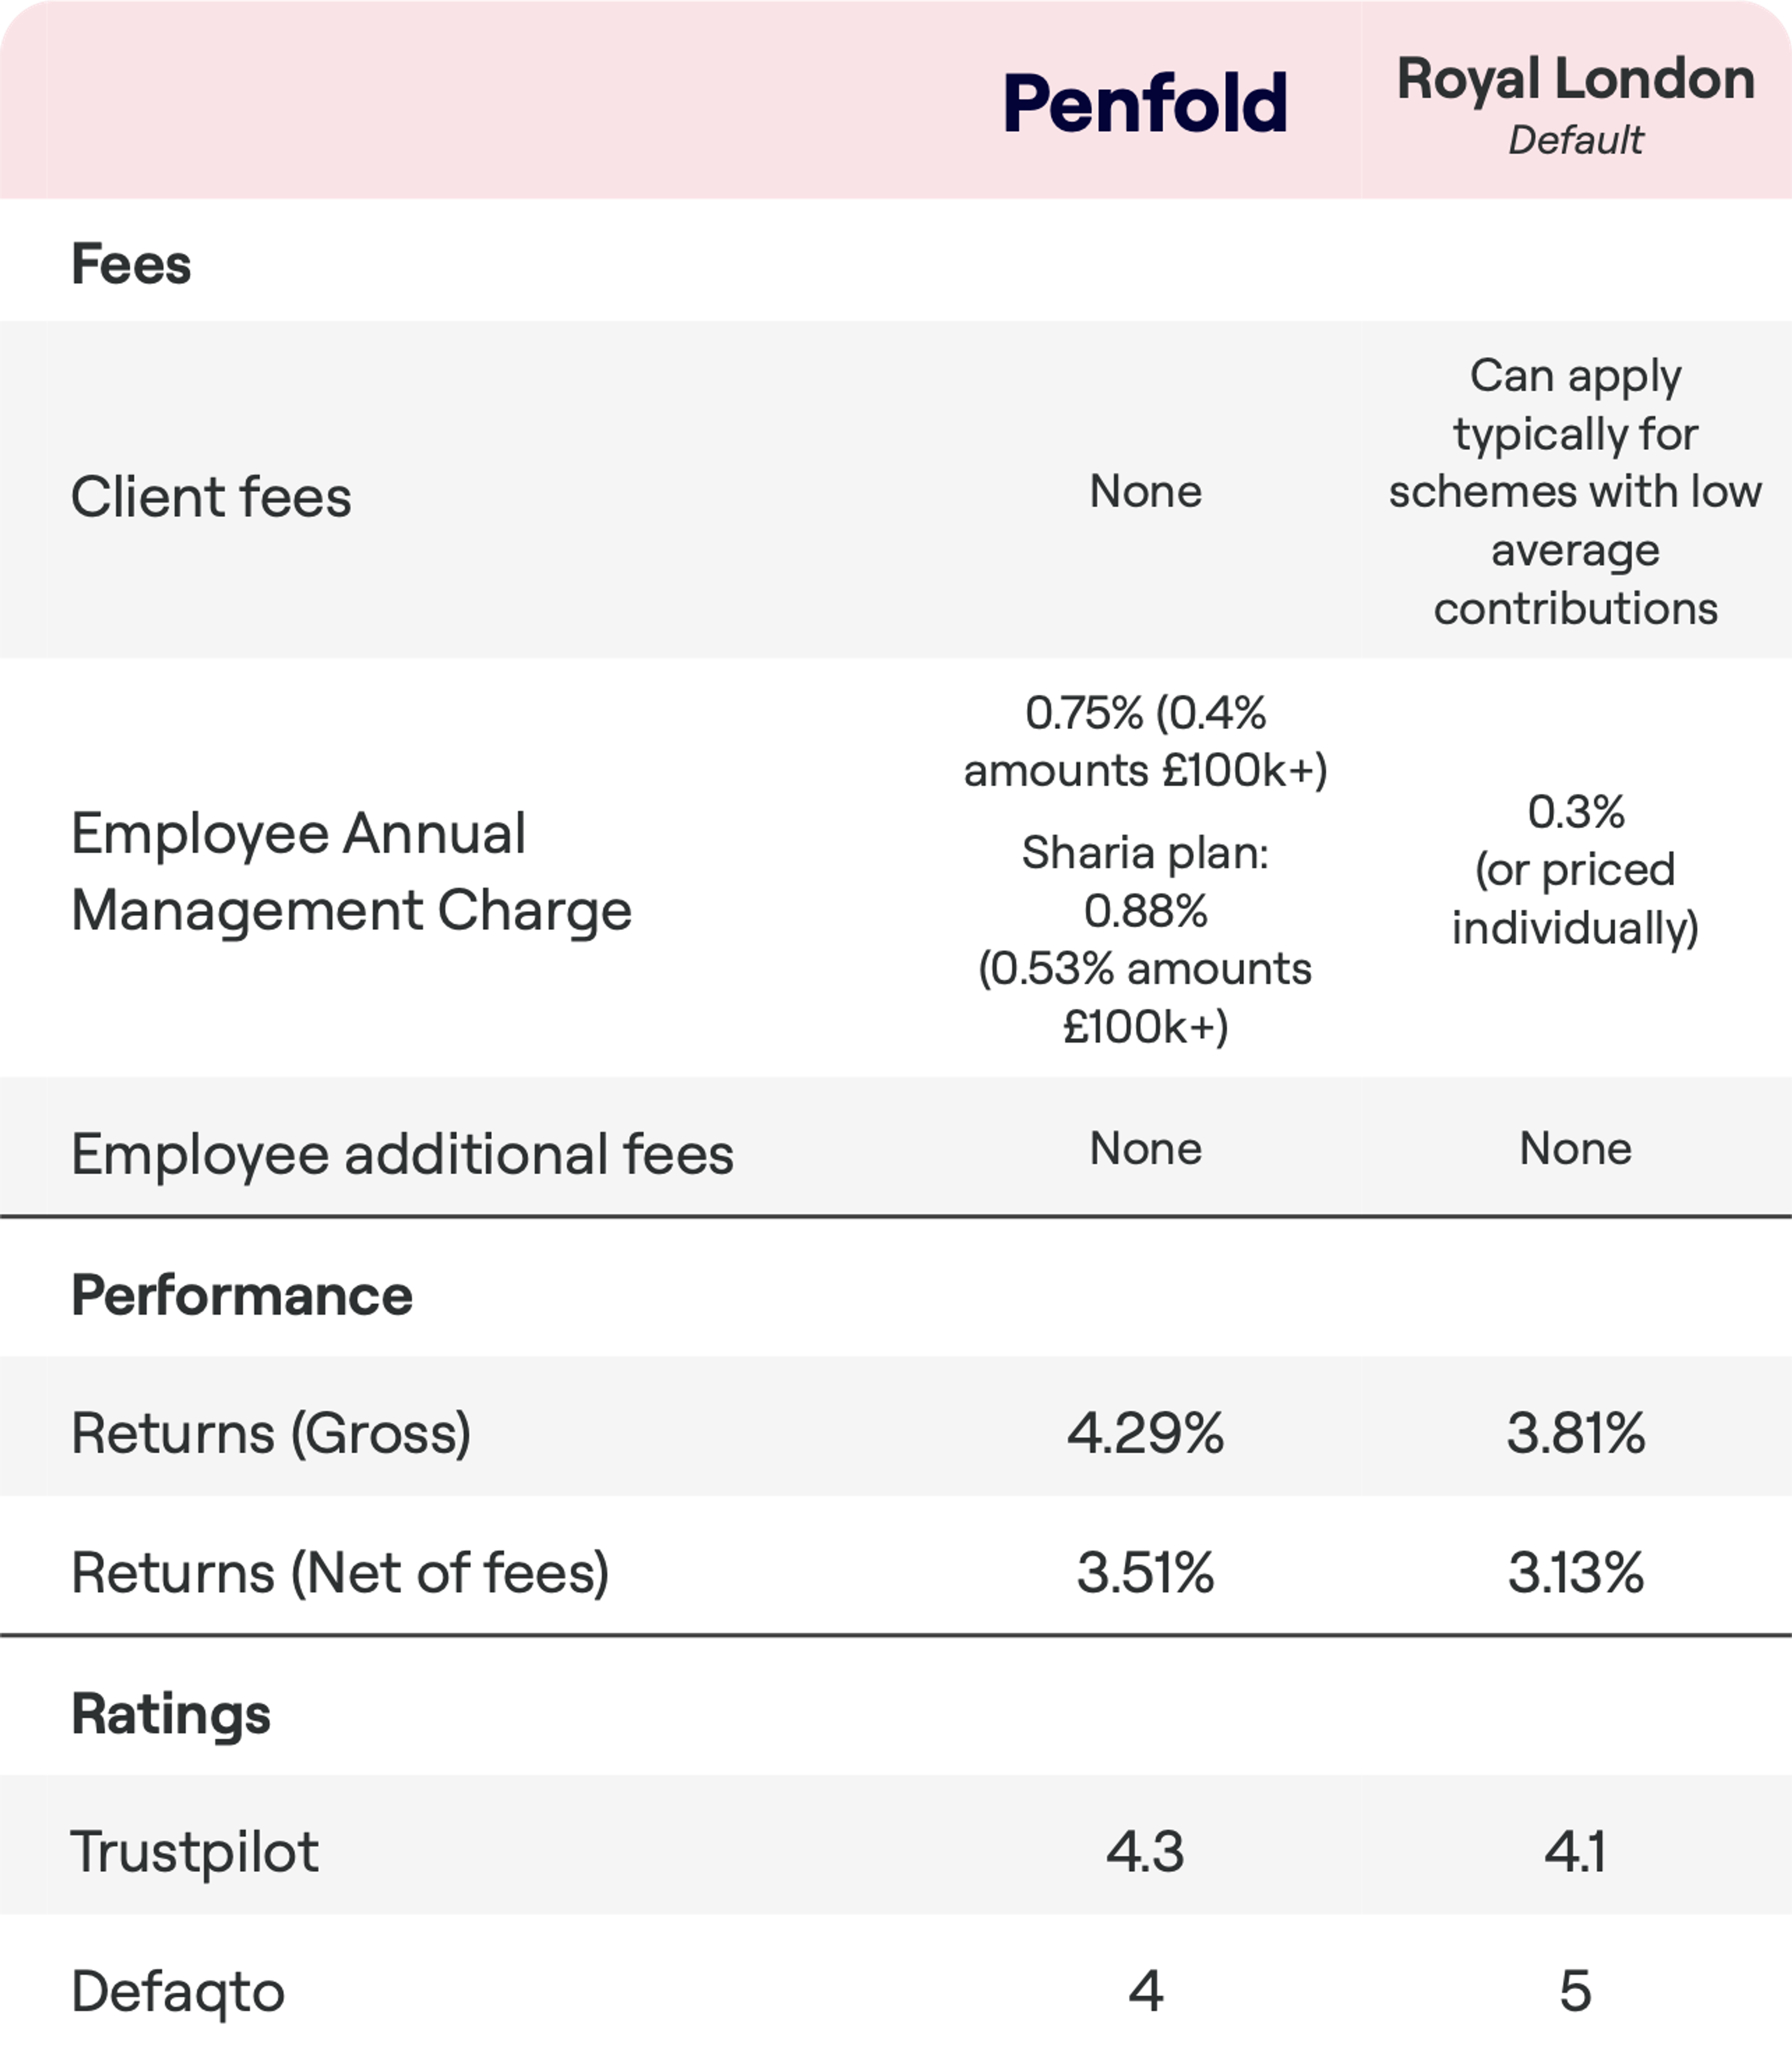 A fee and performance comparison chart between Penfold and Royal London Default pension services. Penfold has no client fees, with an Employee Annual Management Charge of 0.75% (reduced to 0.4% for amounts over £100k) and for the Sharia plan, 0.88% (reduced to 0.53% for over £100k). Royal London may apply client fees for schemes with low average contributions and has a 0.3% management charge (or individually priced). Both have no additional employee fees. Penfold's returns are 4.29% gross and 3.51% net, while Royal London's are 3.81% gross and 3.13% net. Trustpilot rates Penfold at 4.3 and Royal London at 4.1, with Defaqto giving Penfold 4 stars and Royal London 5 stars.